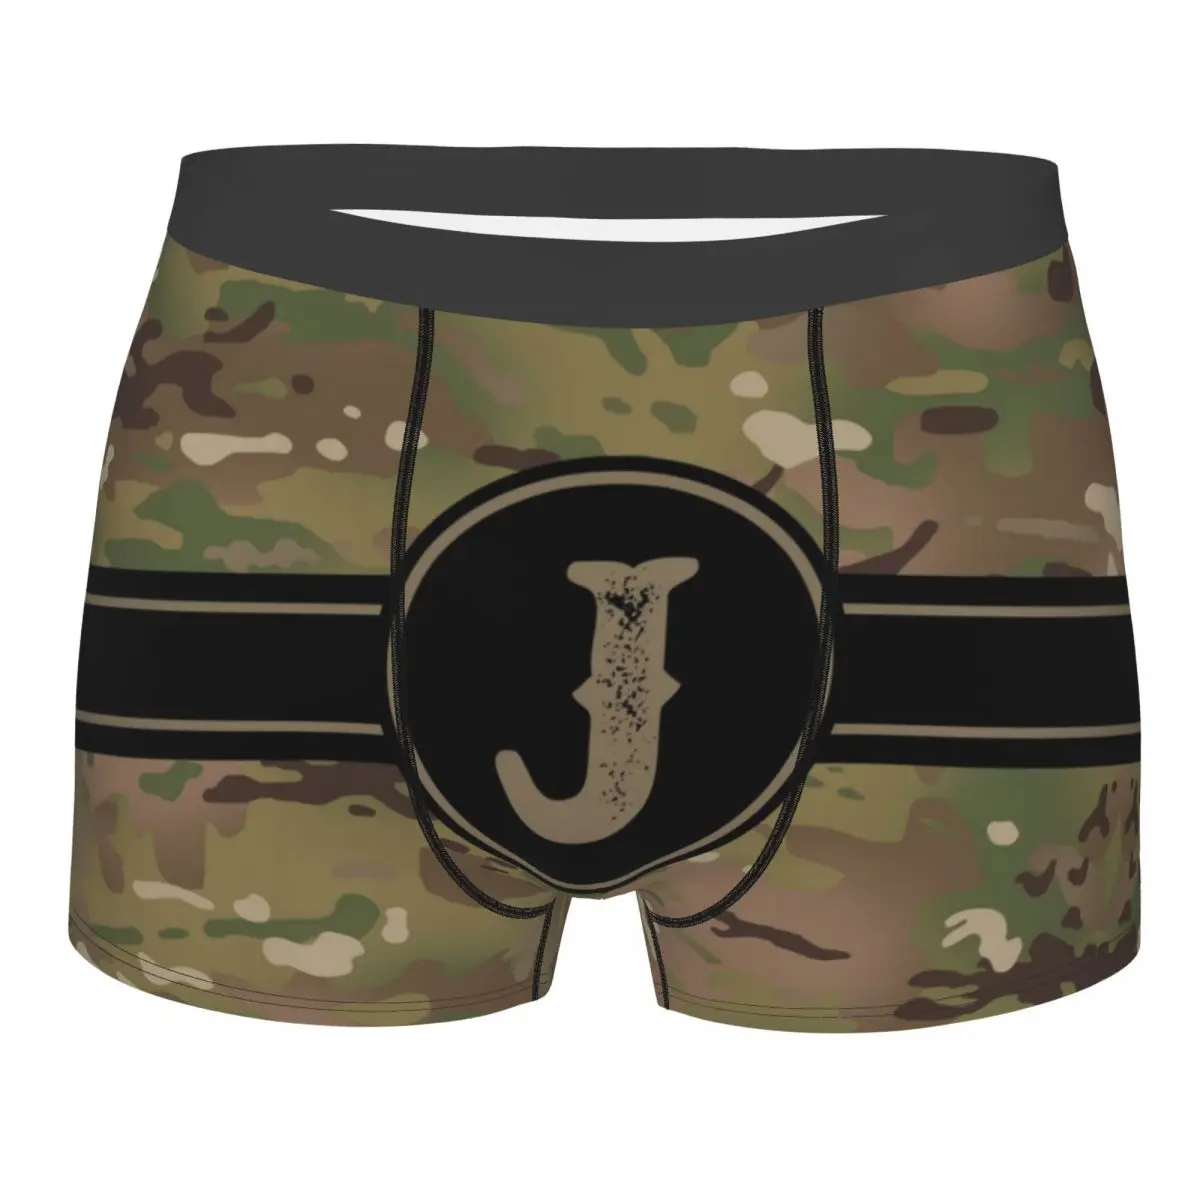 

Fashion Boxer Army Camouflage Monogram Letter J Shorts Panties Briefs Man Underwear Military Camo Soft Underpants for Male S-XXL